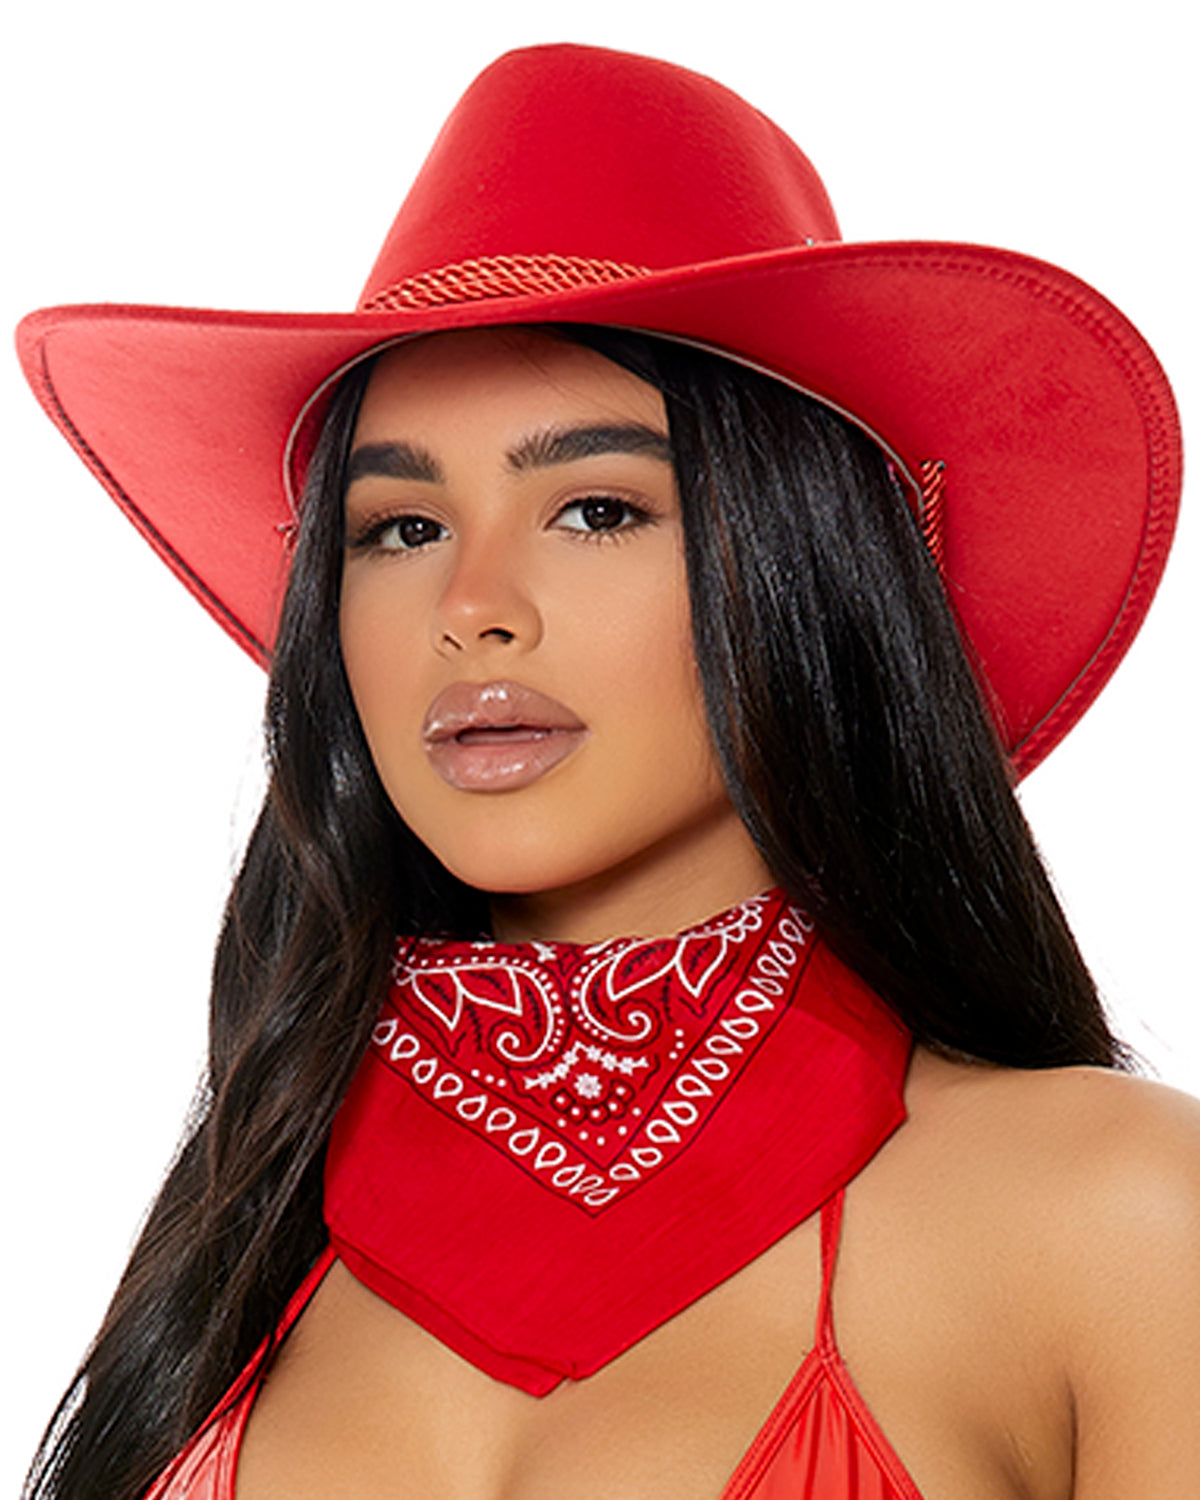 Old Town Road Cowboy Hat